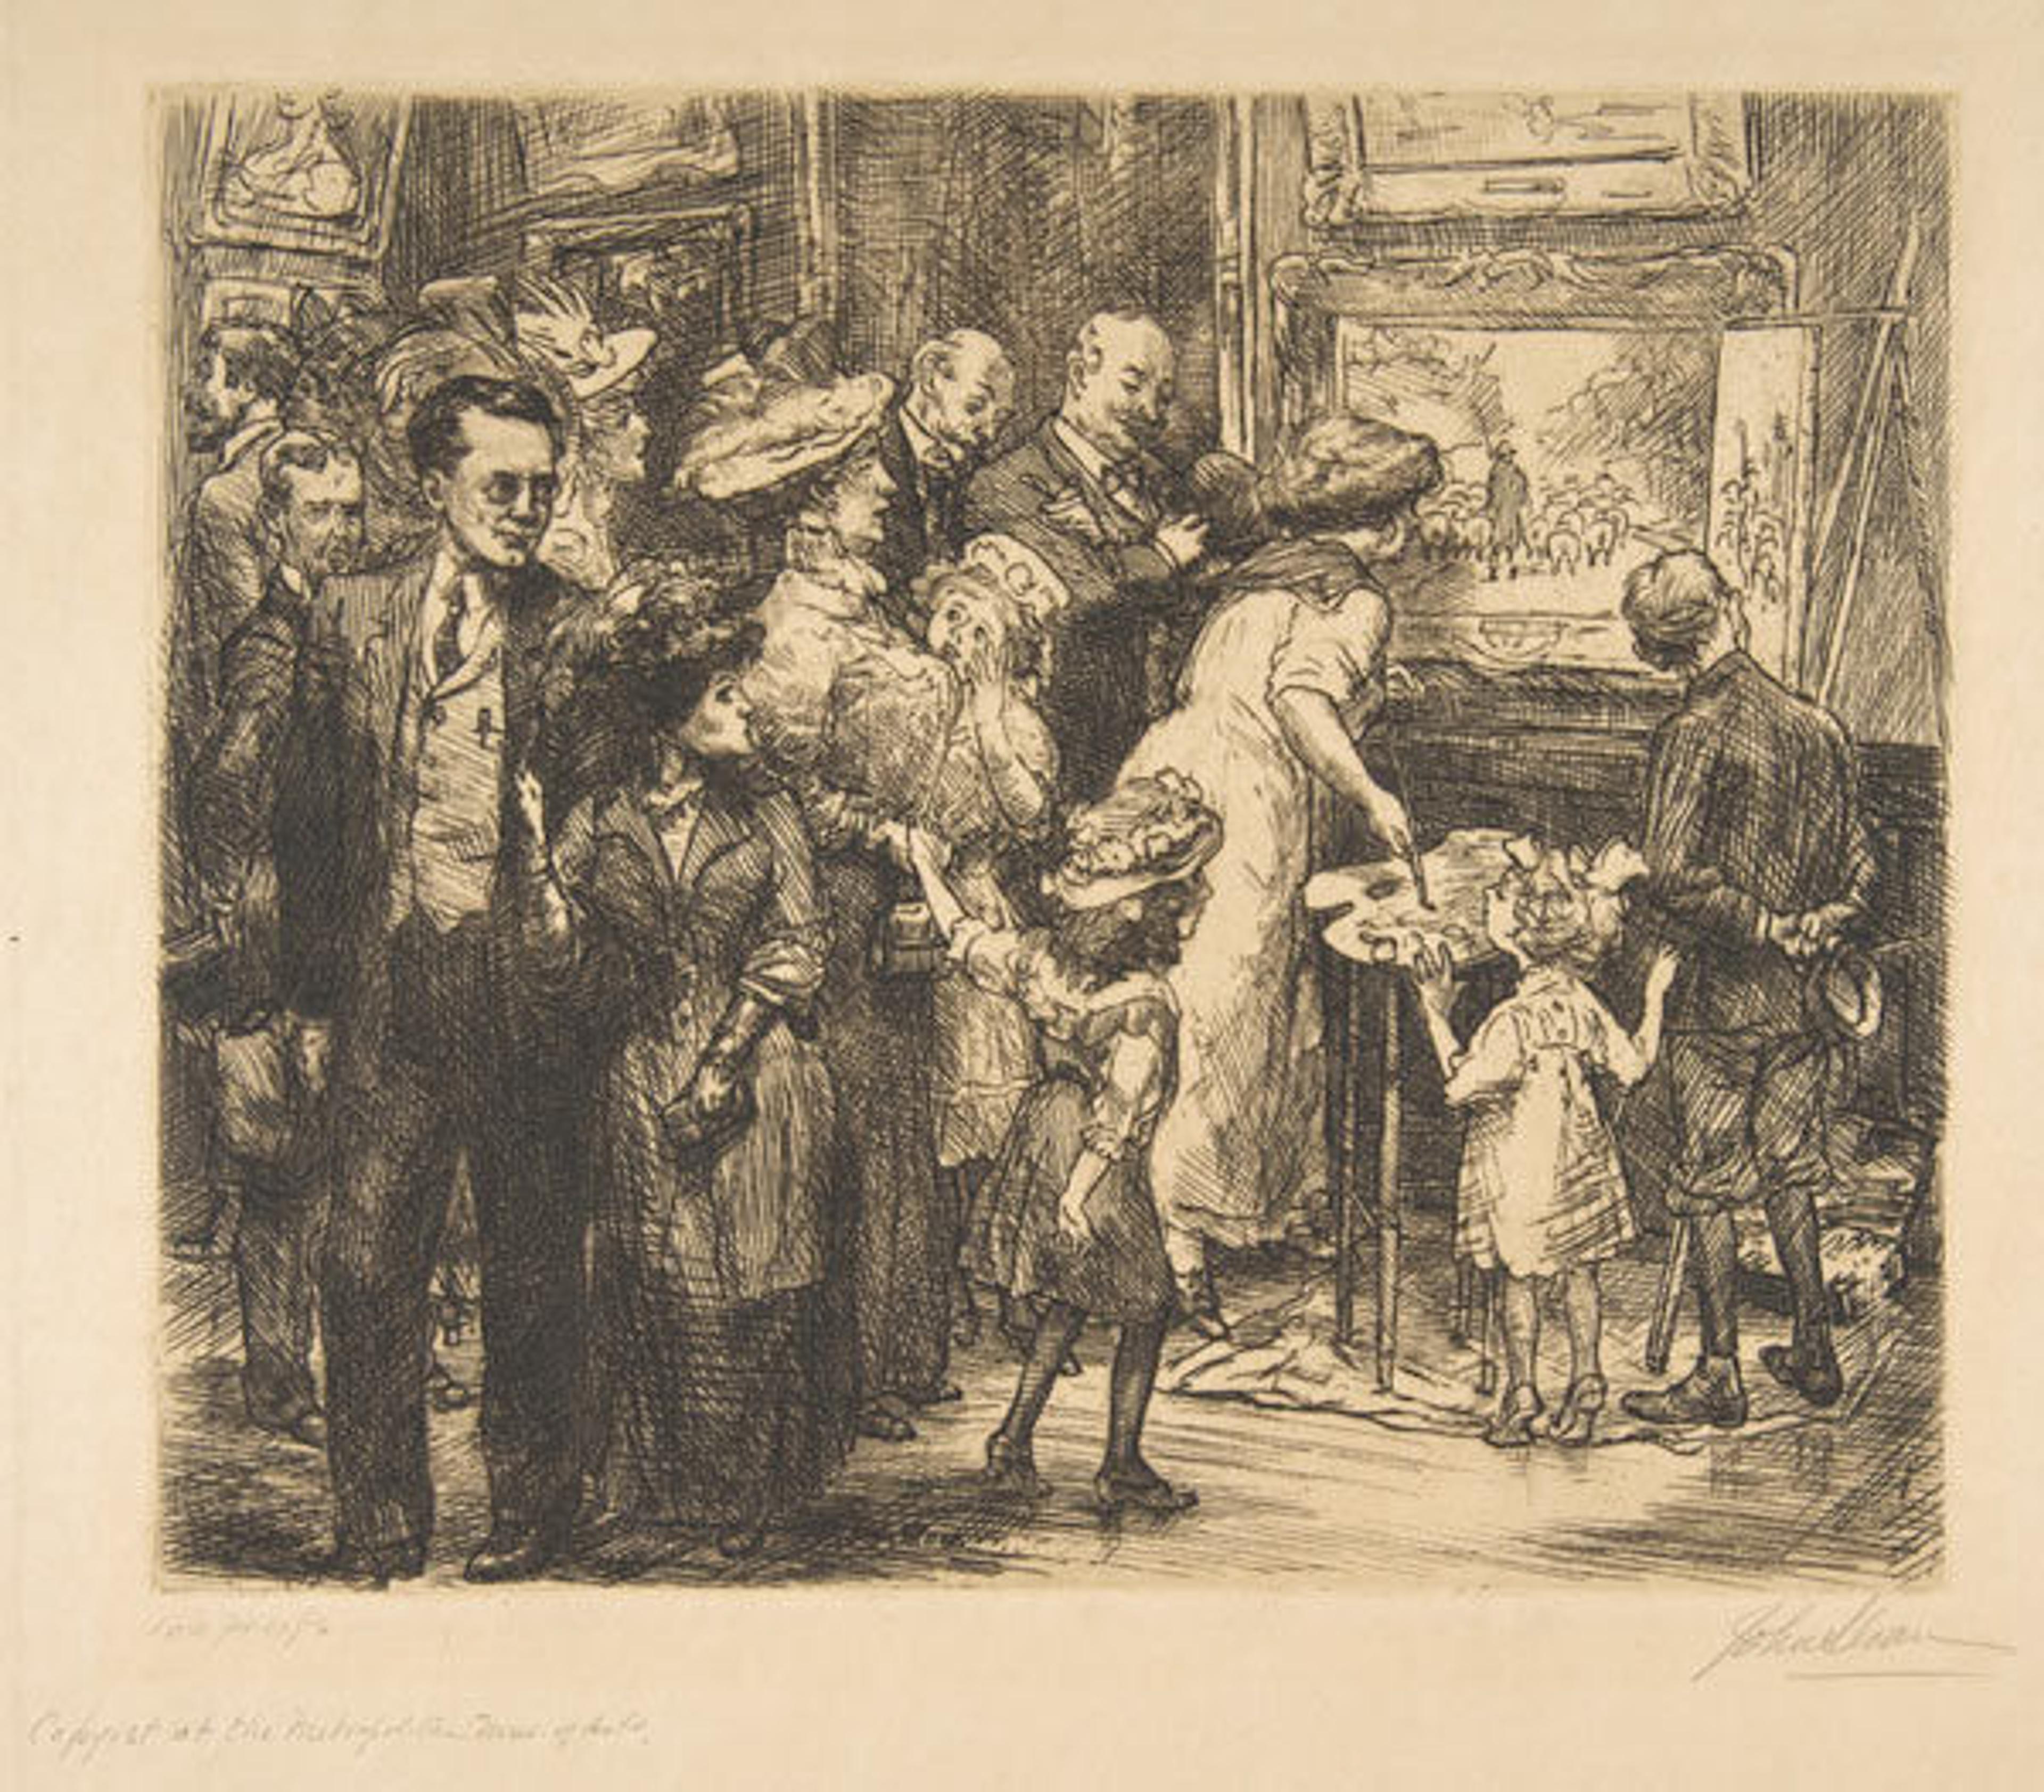 John Sloan (American, 1871–1951). Copyist at The Metropolitan Museum of Art, 1908. Etching; plate: 7 3/8 x 8 3/4 in. (18.7 x 22.2 cm); sheet: 12 15/16 x 13 15/16 in. (32.9 x 35.4 cm). The Metropolitan Museum of Art, New York, Gift of Mrs. Harry Payne Whitney, 1926 (26.30.28). © 2015 Artists Rights Society (ARS) New York